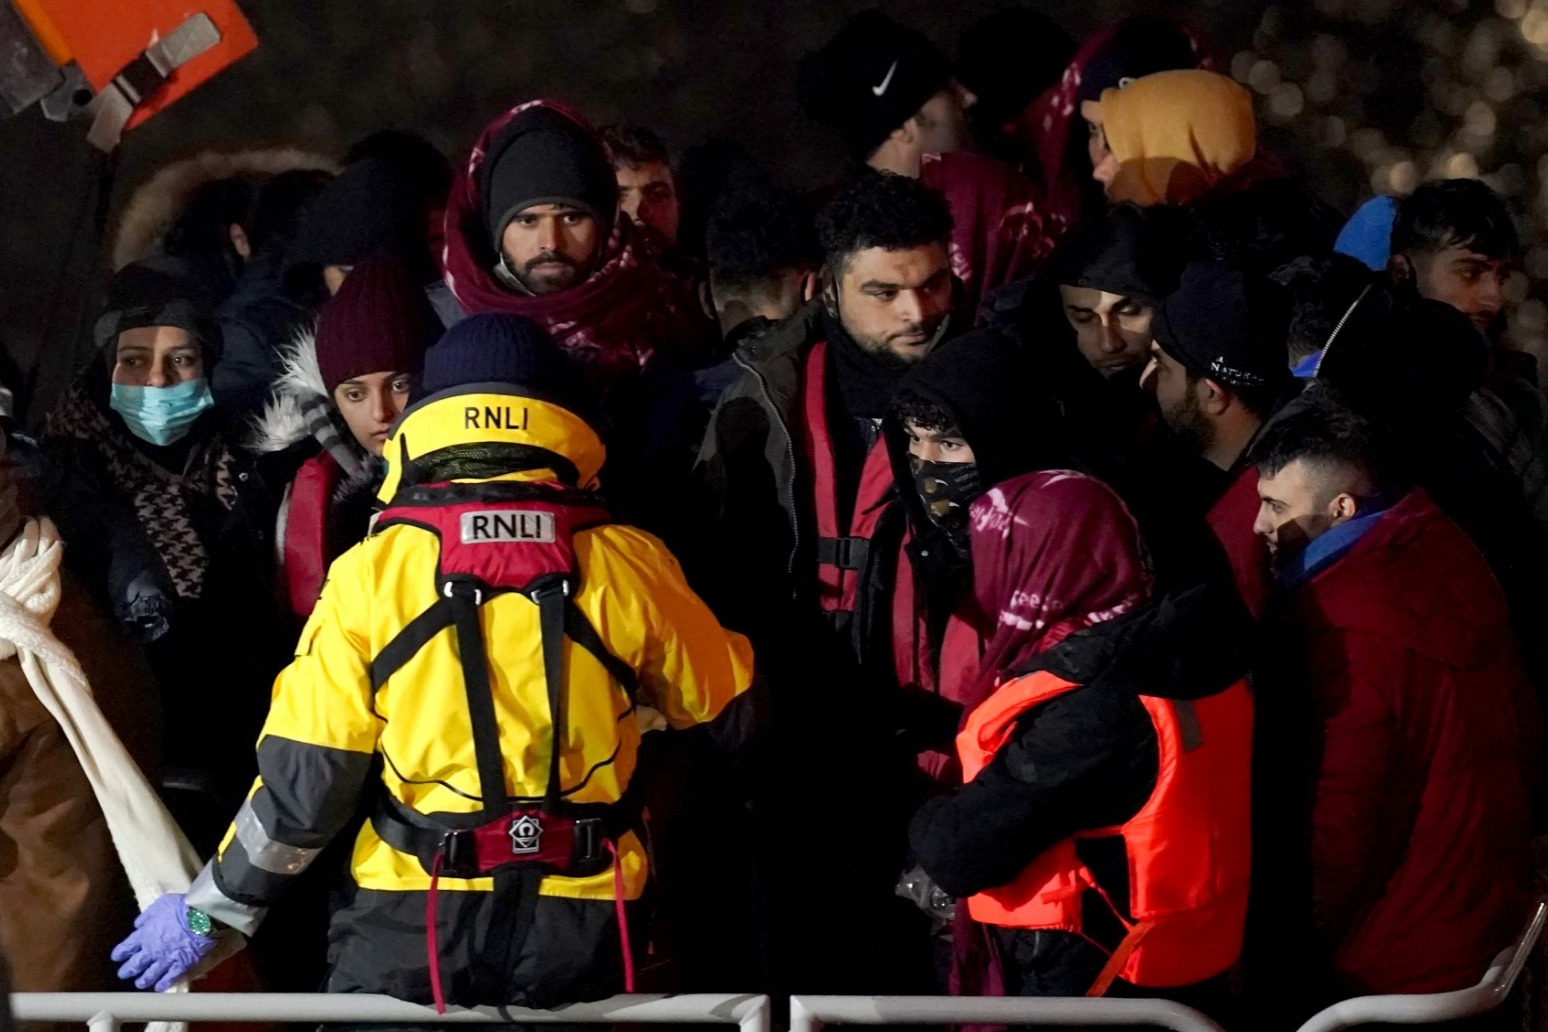 More migrants rescued from Channel following crossing death thumbnail